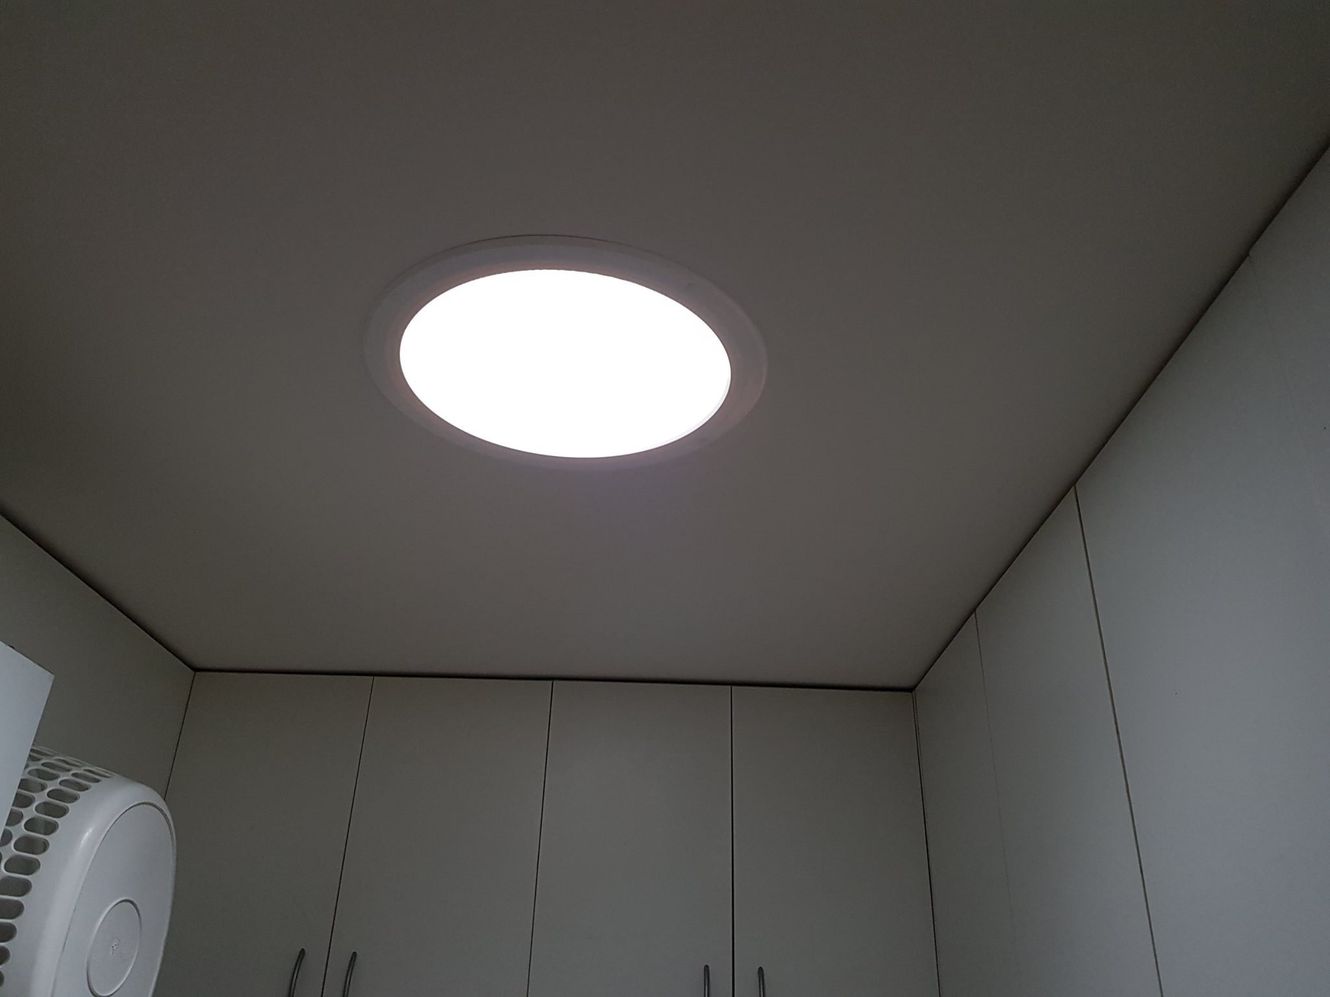 Ceiling light — Skylight Installations & Repairs in Central Coast, NSW